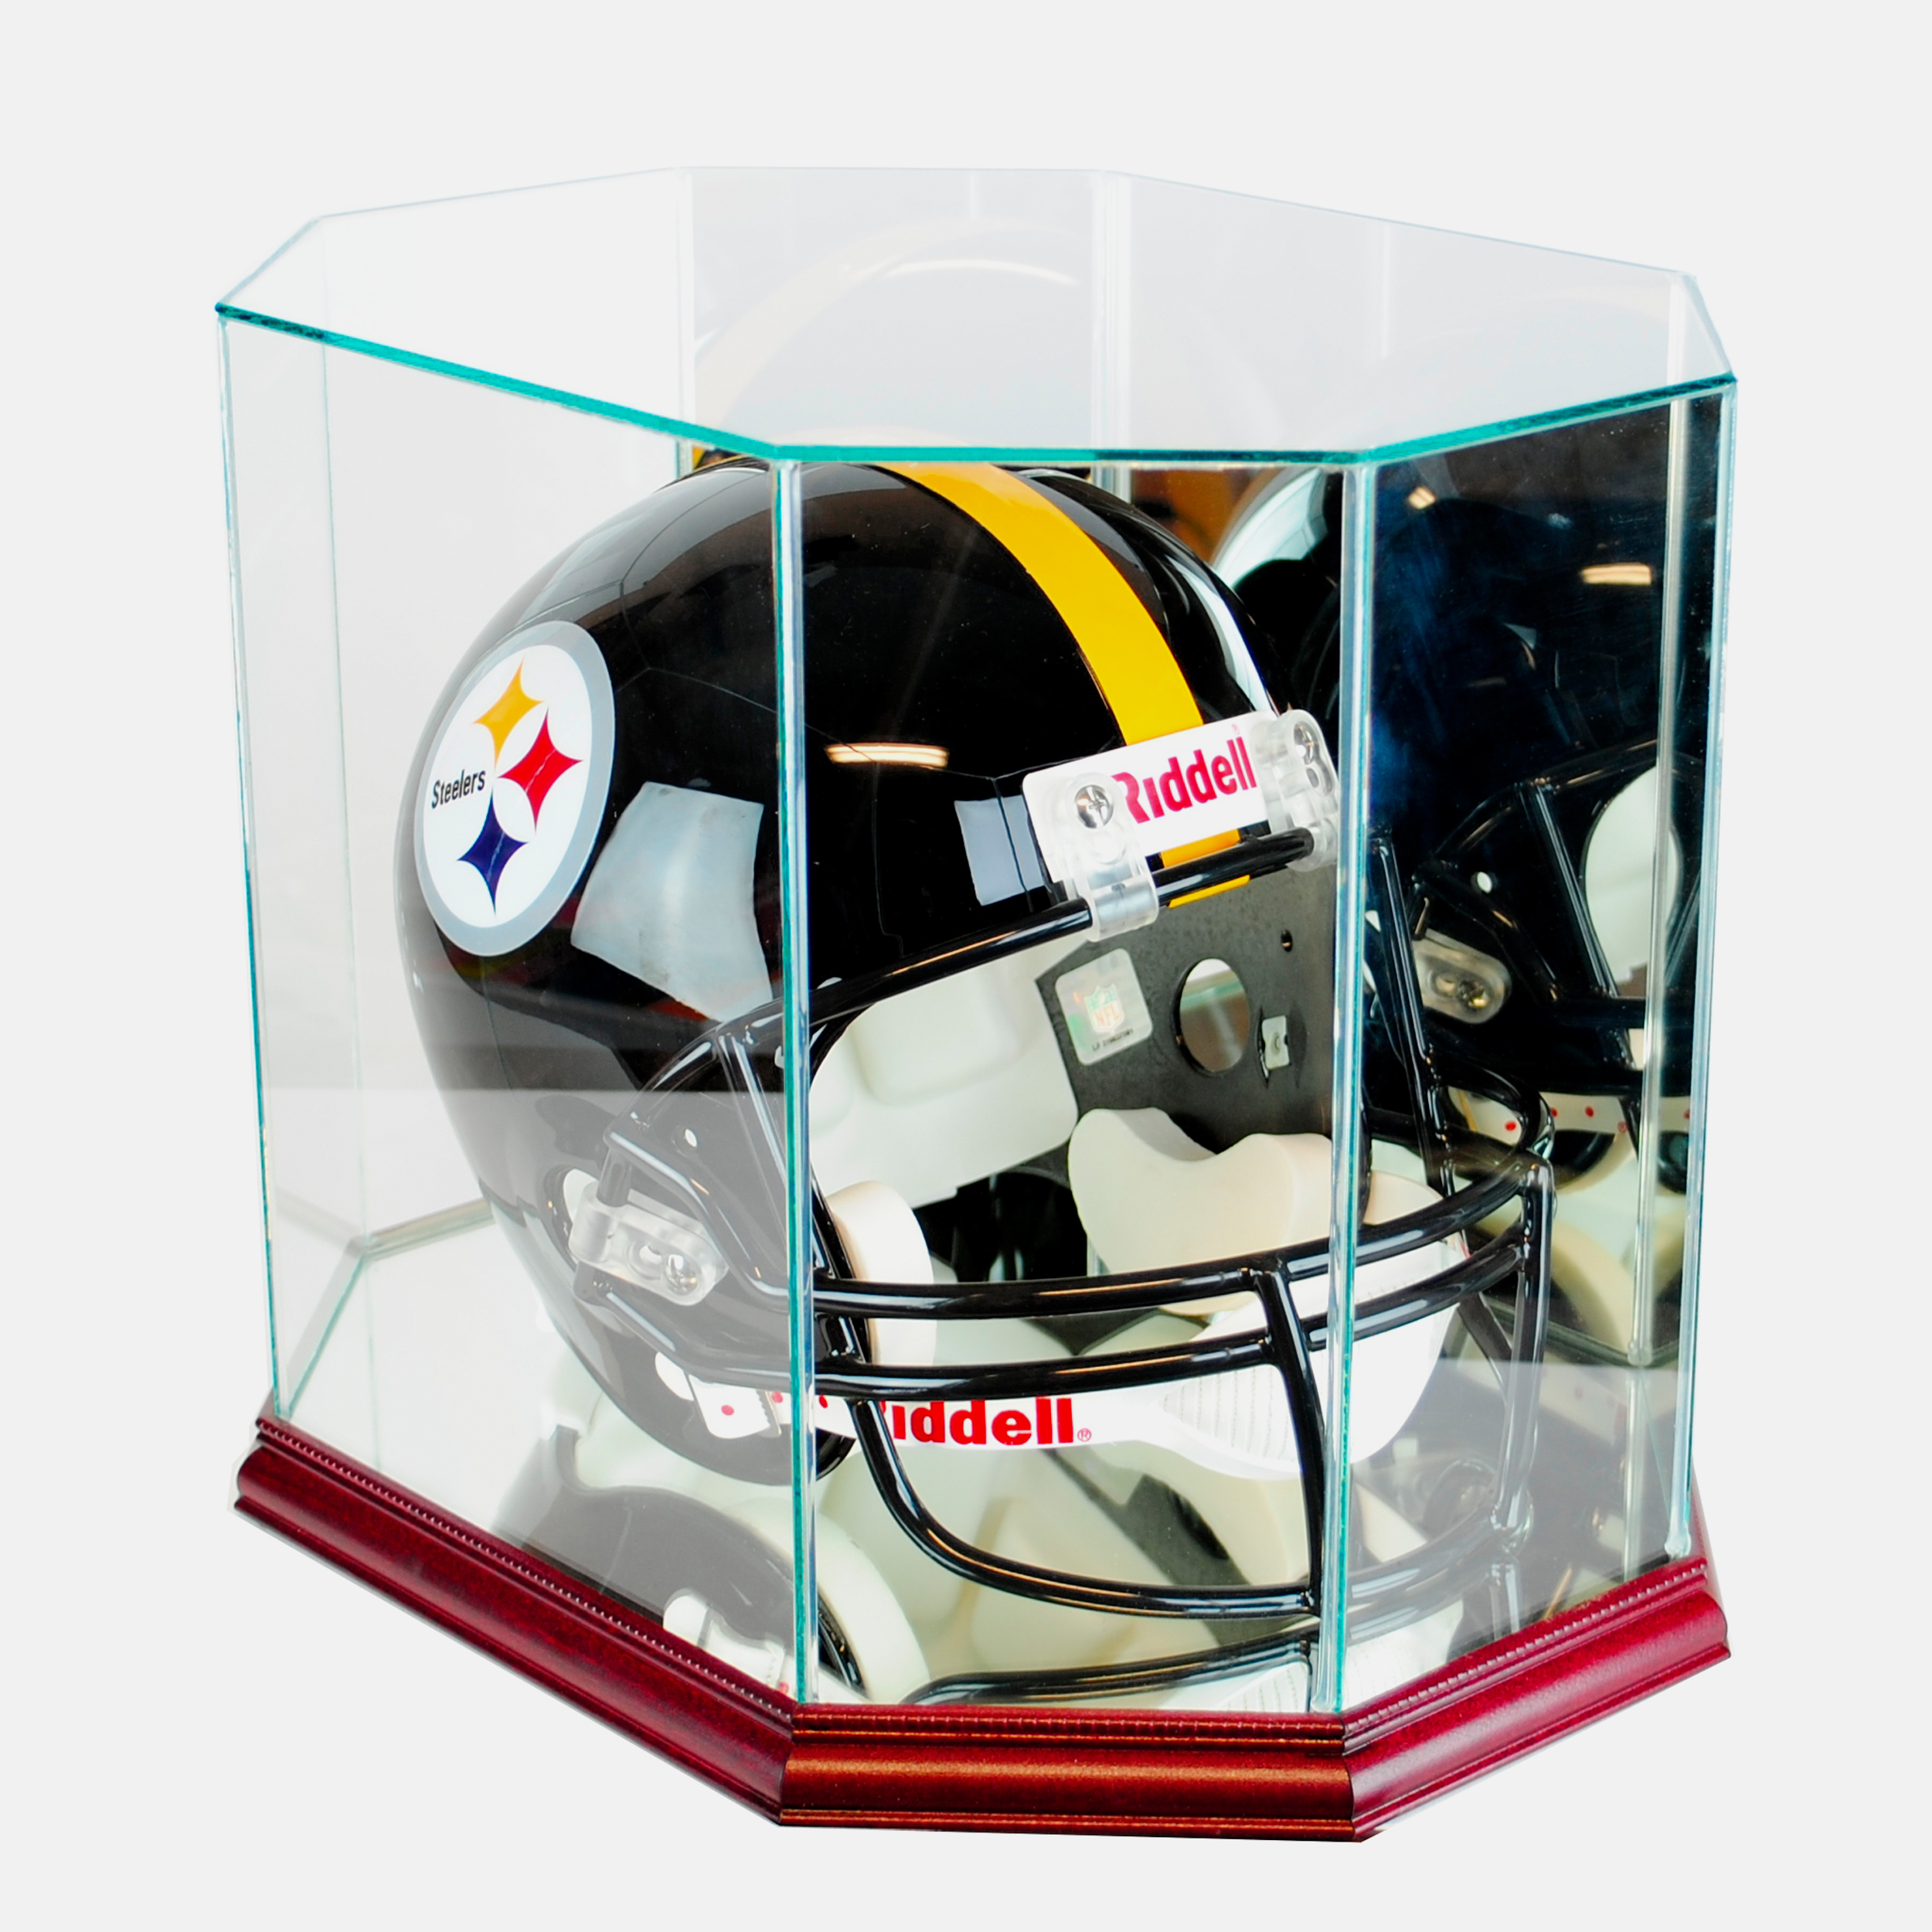 Perfect Cases - Octagon Full Size Football Helmet Display Case, Cherry Finish - image 2 of 2